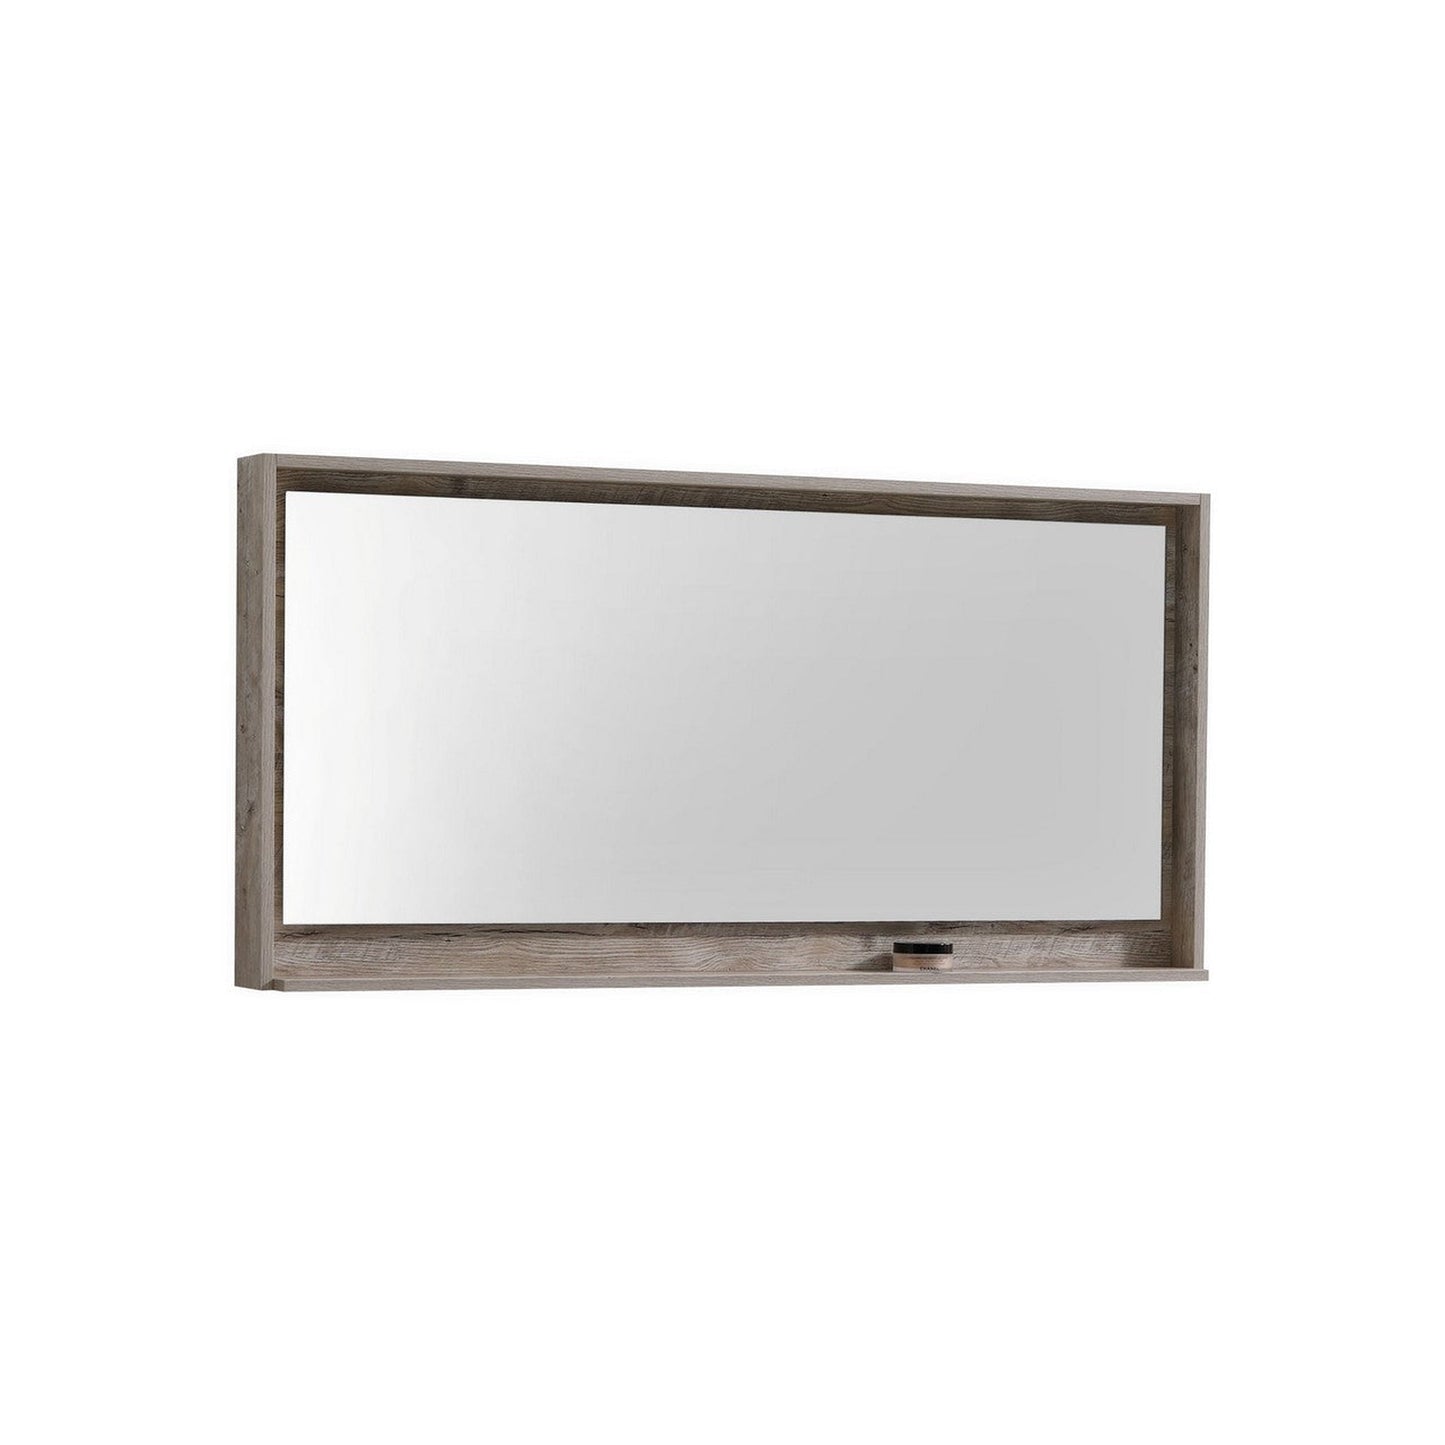 KubeBath Bliss 60" Nature Wood Wall-Mounted Modern Bathroom Vanity With Double Integrated Acrylic Sink With Overflow and 60" Wood Framed Mirror With Shelf